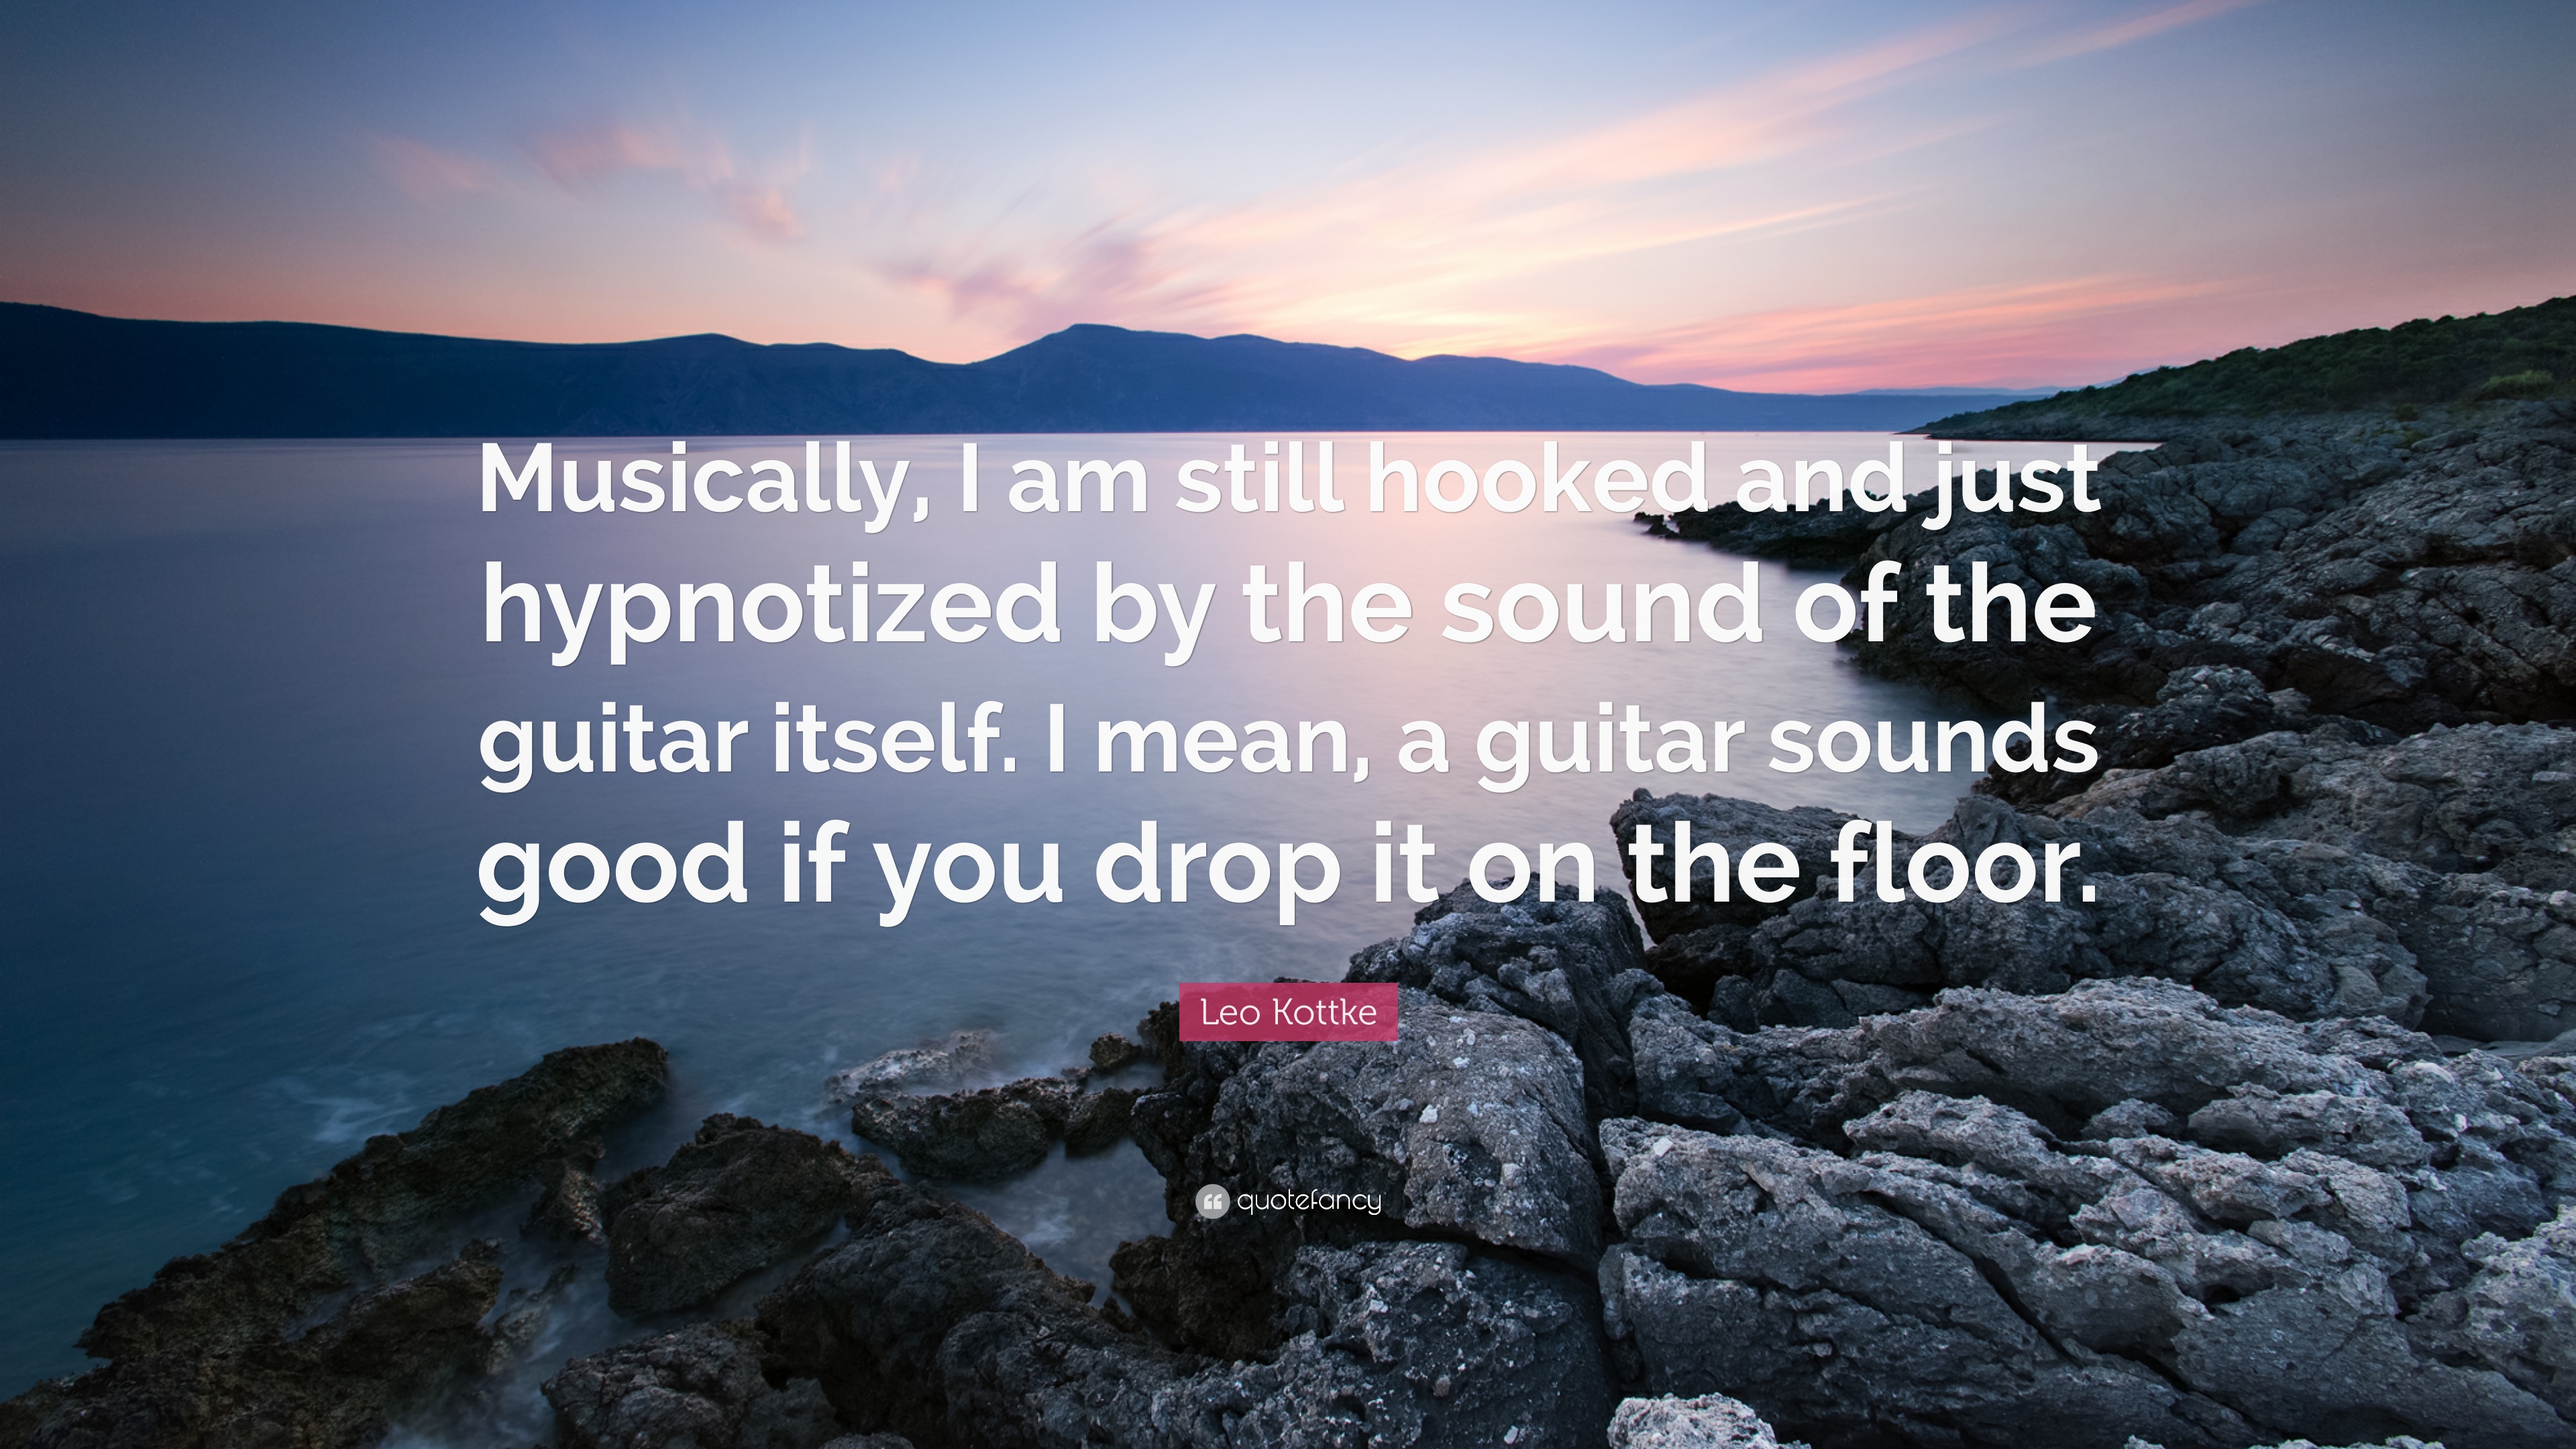 Leo Kottke Quote: “Musically, I am still hooked and just hypnotized